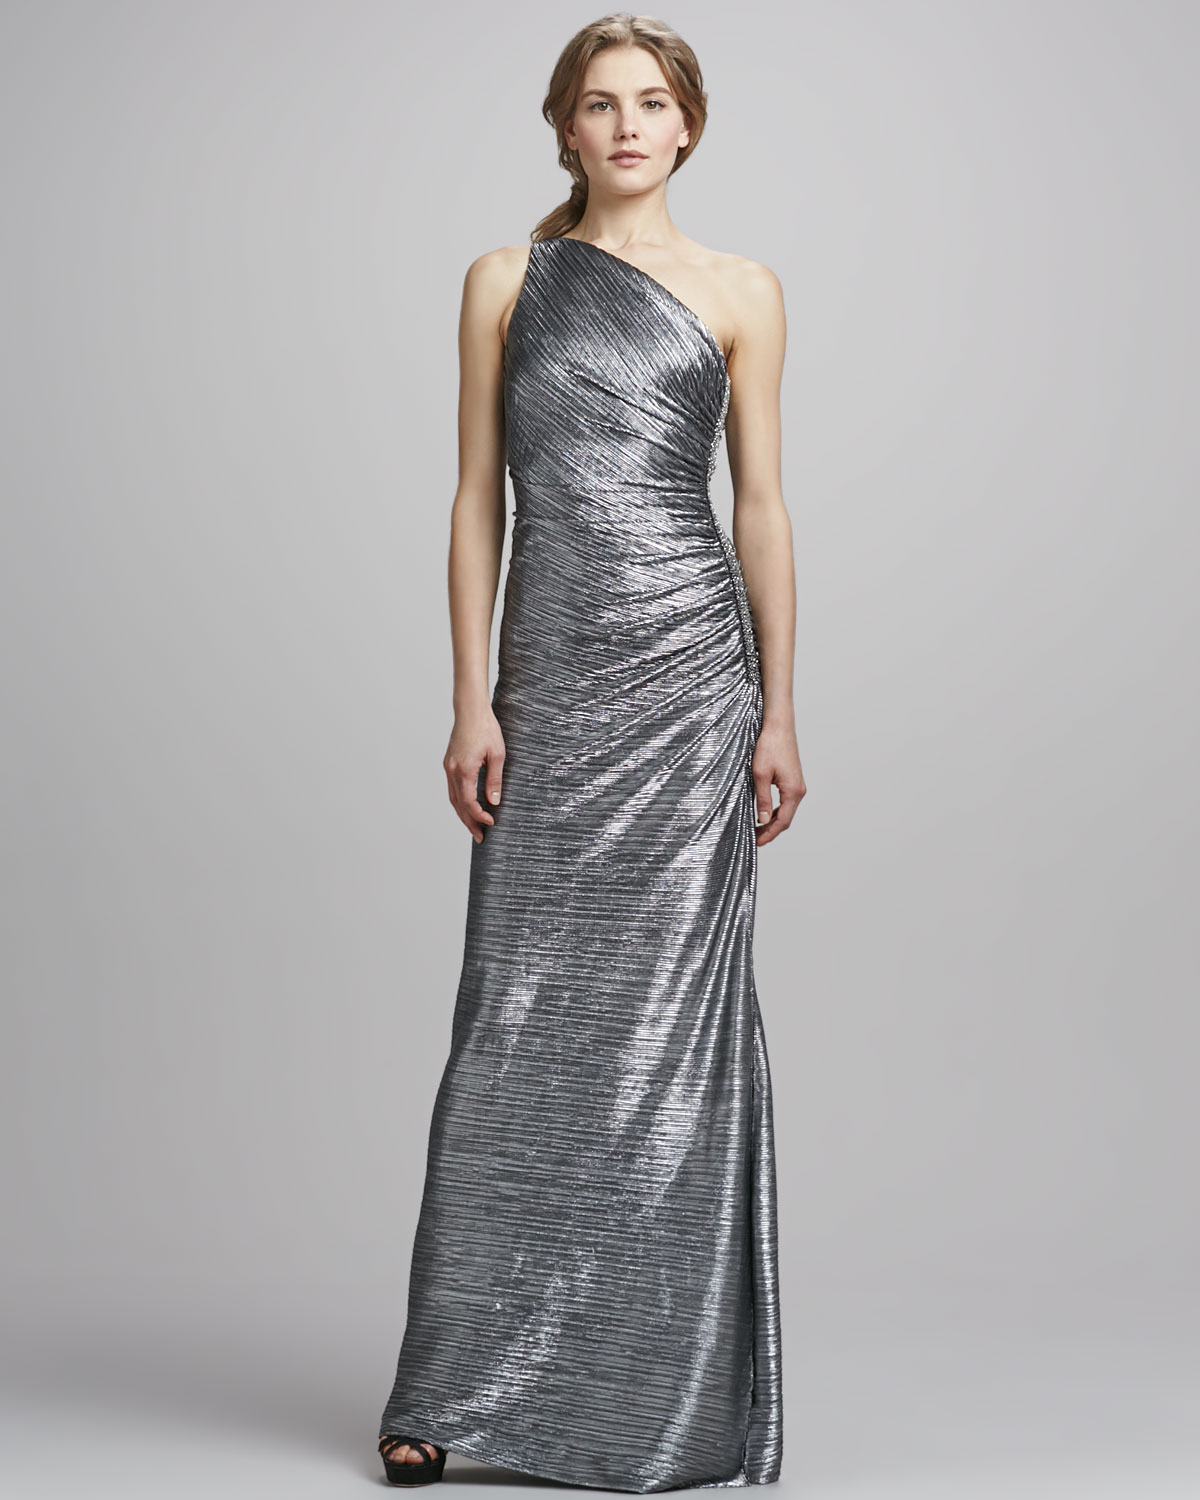 Lyst - Laundry By Shelli Segal Metallic Oneshoulder Beaded Side Gown in ...